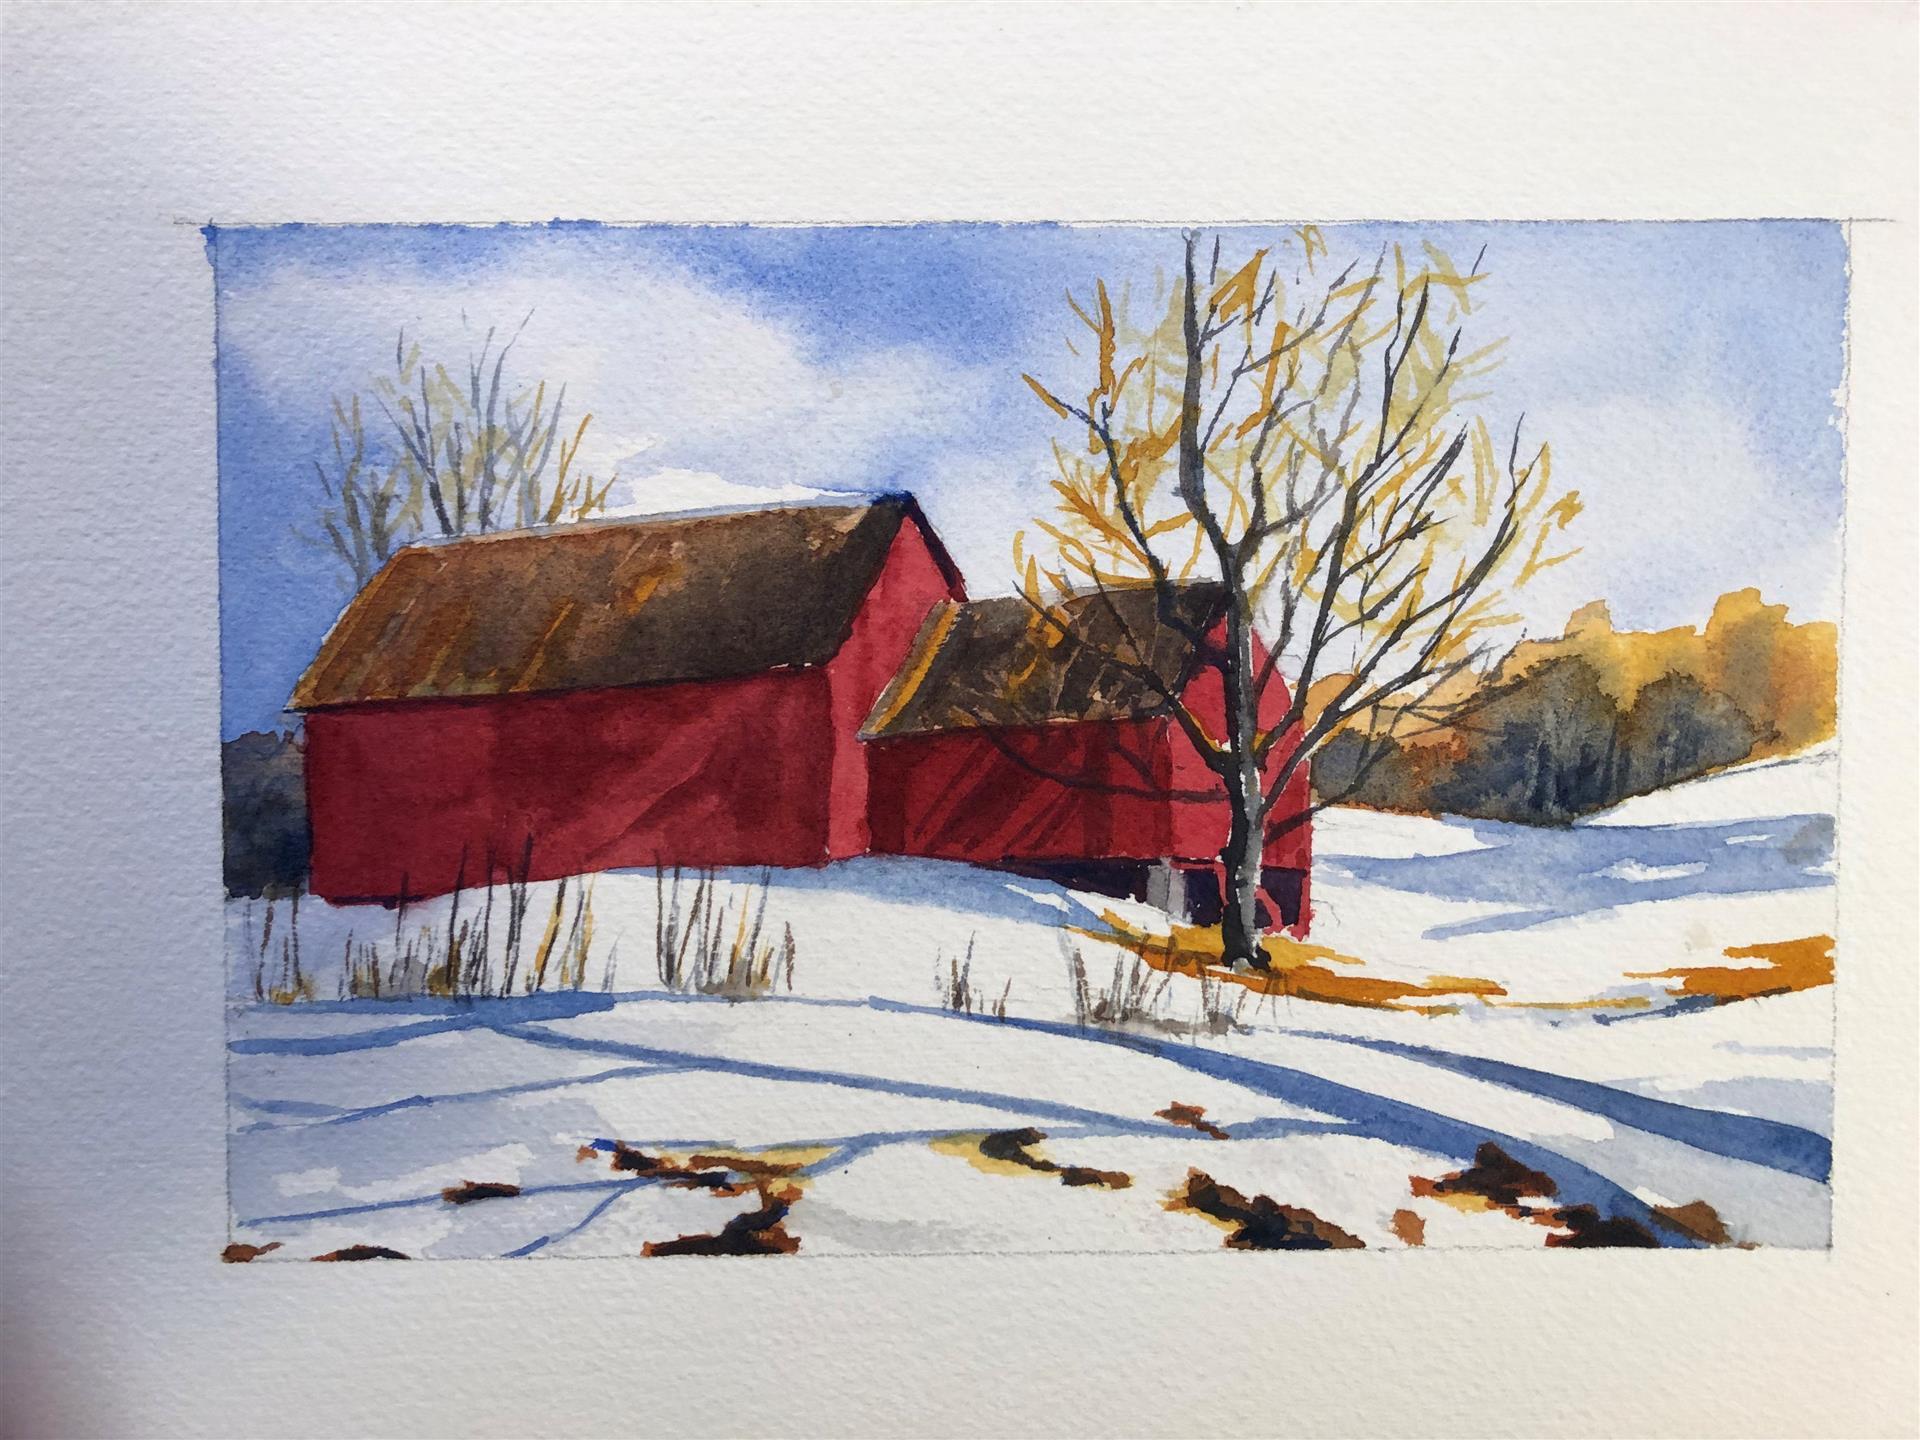 SOLD Gwen Fuller, "Shadows on Snow", Watercolor, $200